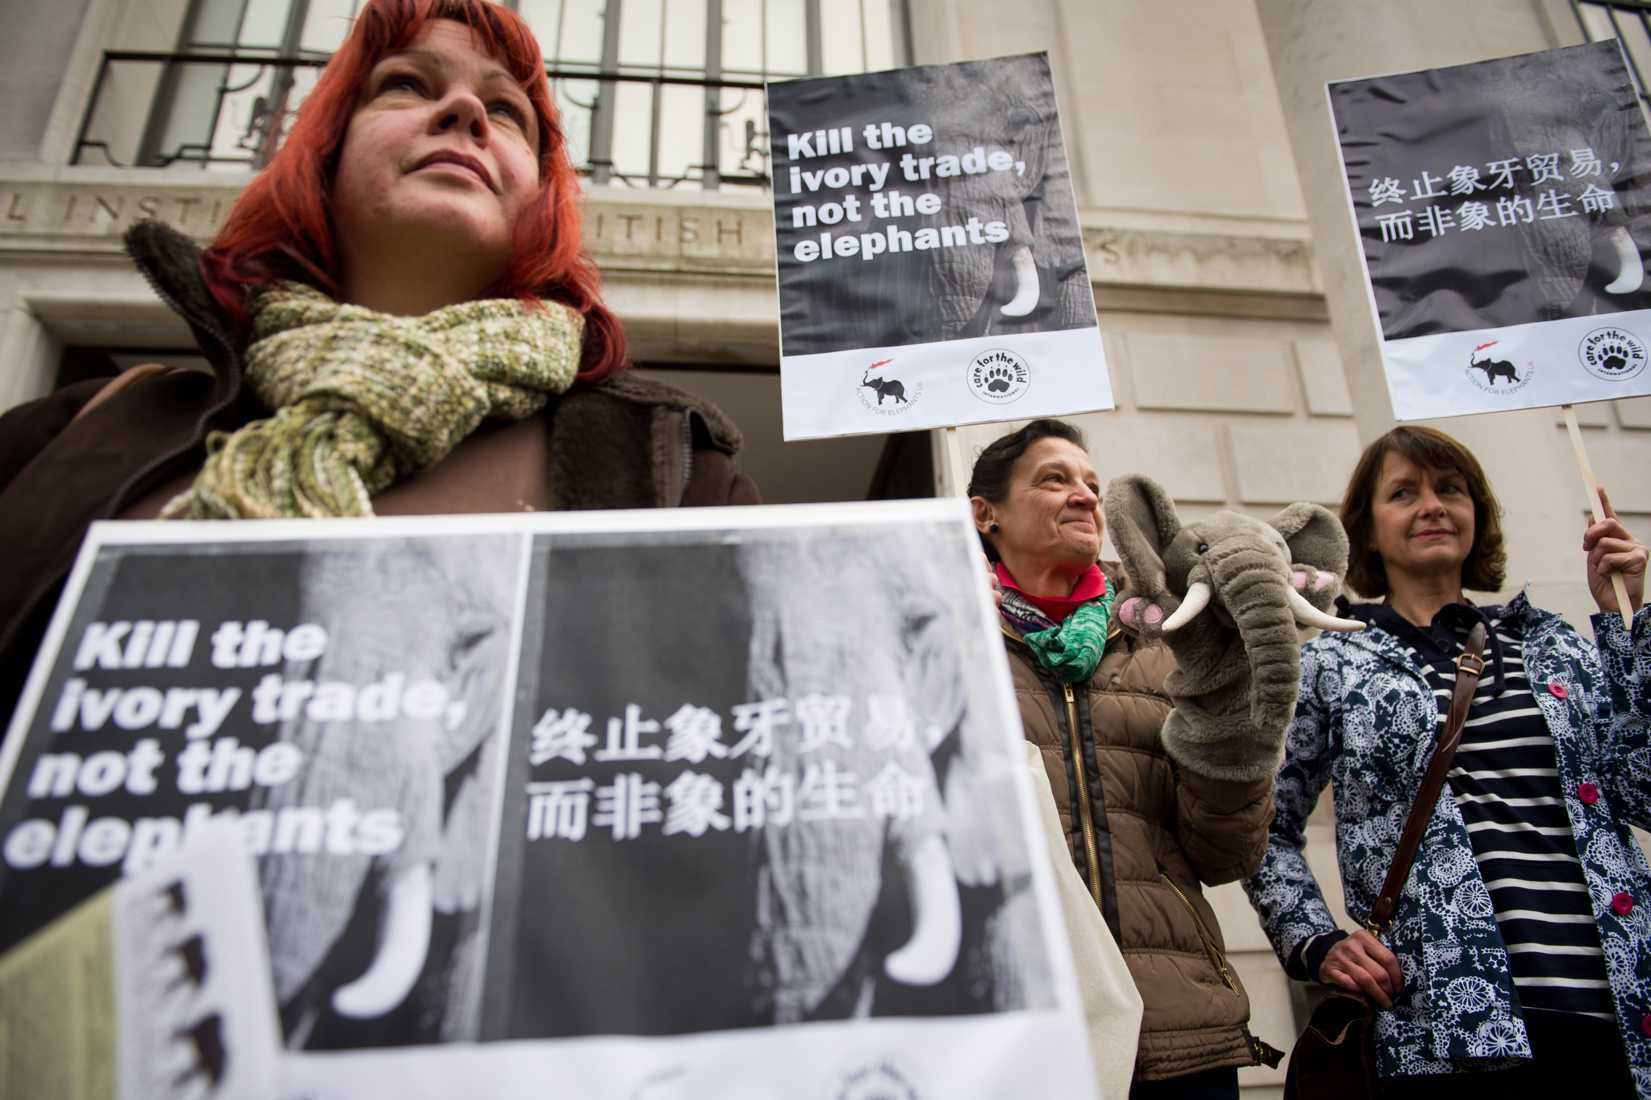 A protester with a banner displaying Chinese characters joins a demonstration outside the Chinese embassy in London, on Jan. 25, 2014, to call for an end to the ivory trade in China. (Leon Nea—AFP/Getty Images)